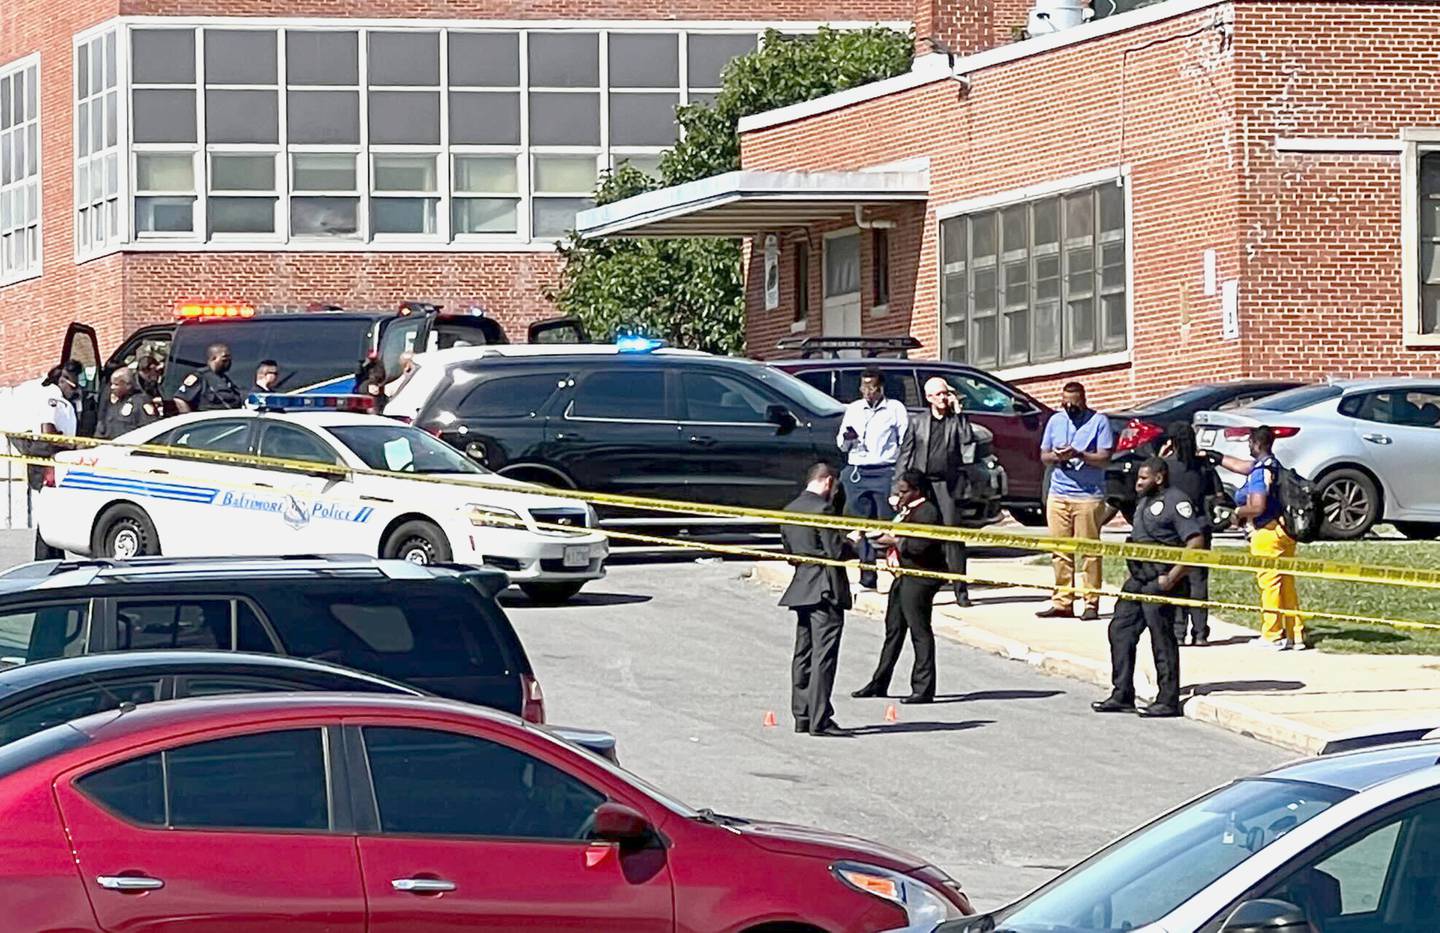 Police officer stand at two evidence markers during a shooting at Mergenthaler vocational high school  with major police presence.